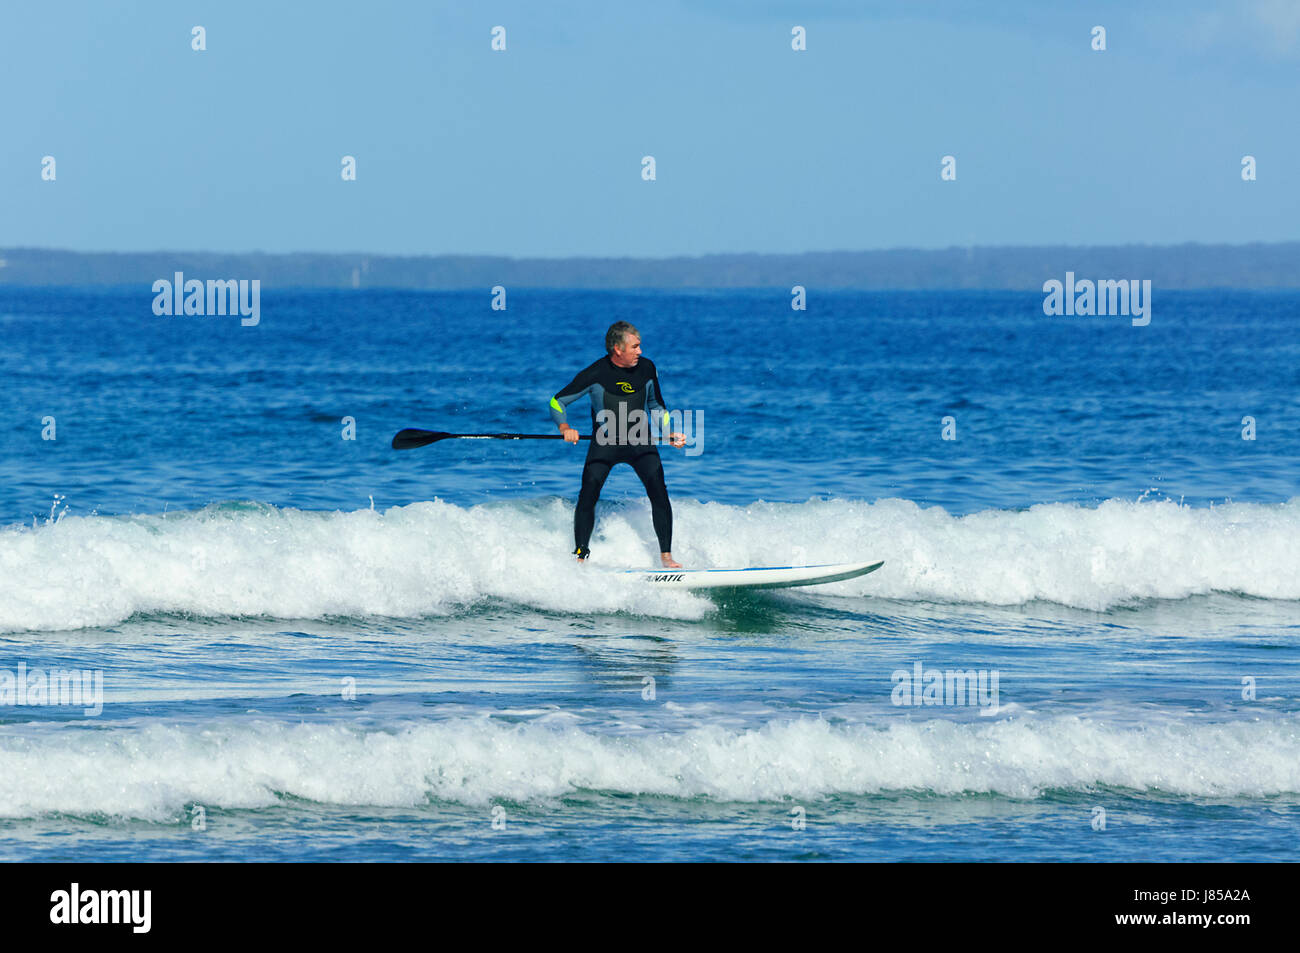 Man 50-60 surfing on a stand up paddleboard and wearing a wetsuit, 7 Mile Beach, Gerroa, New South Wales, NSW, Australia Stock Photo